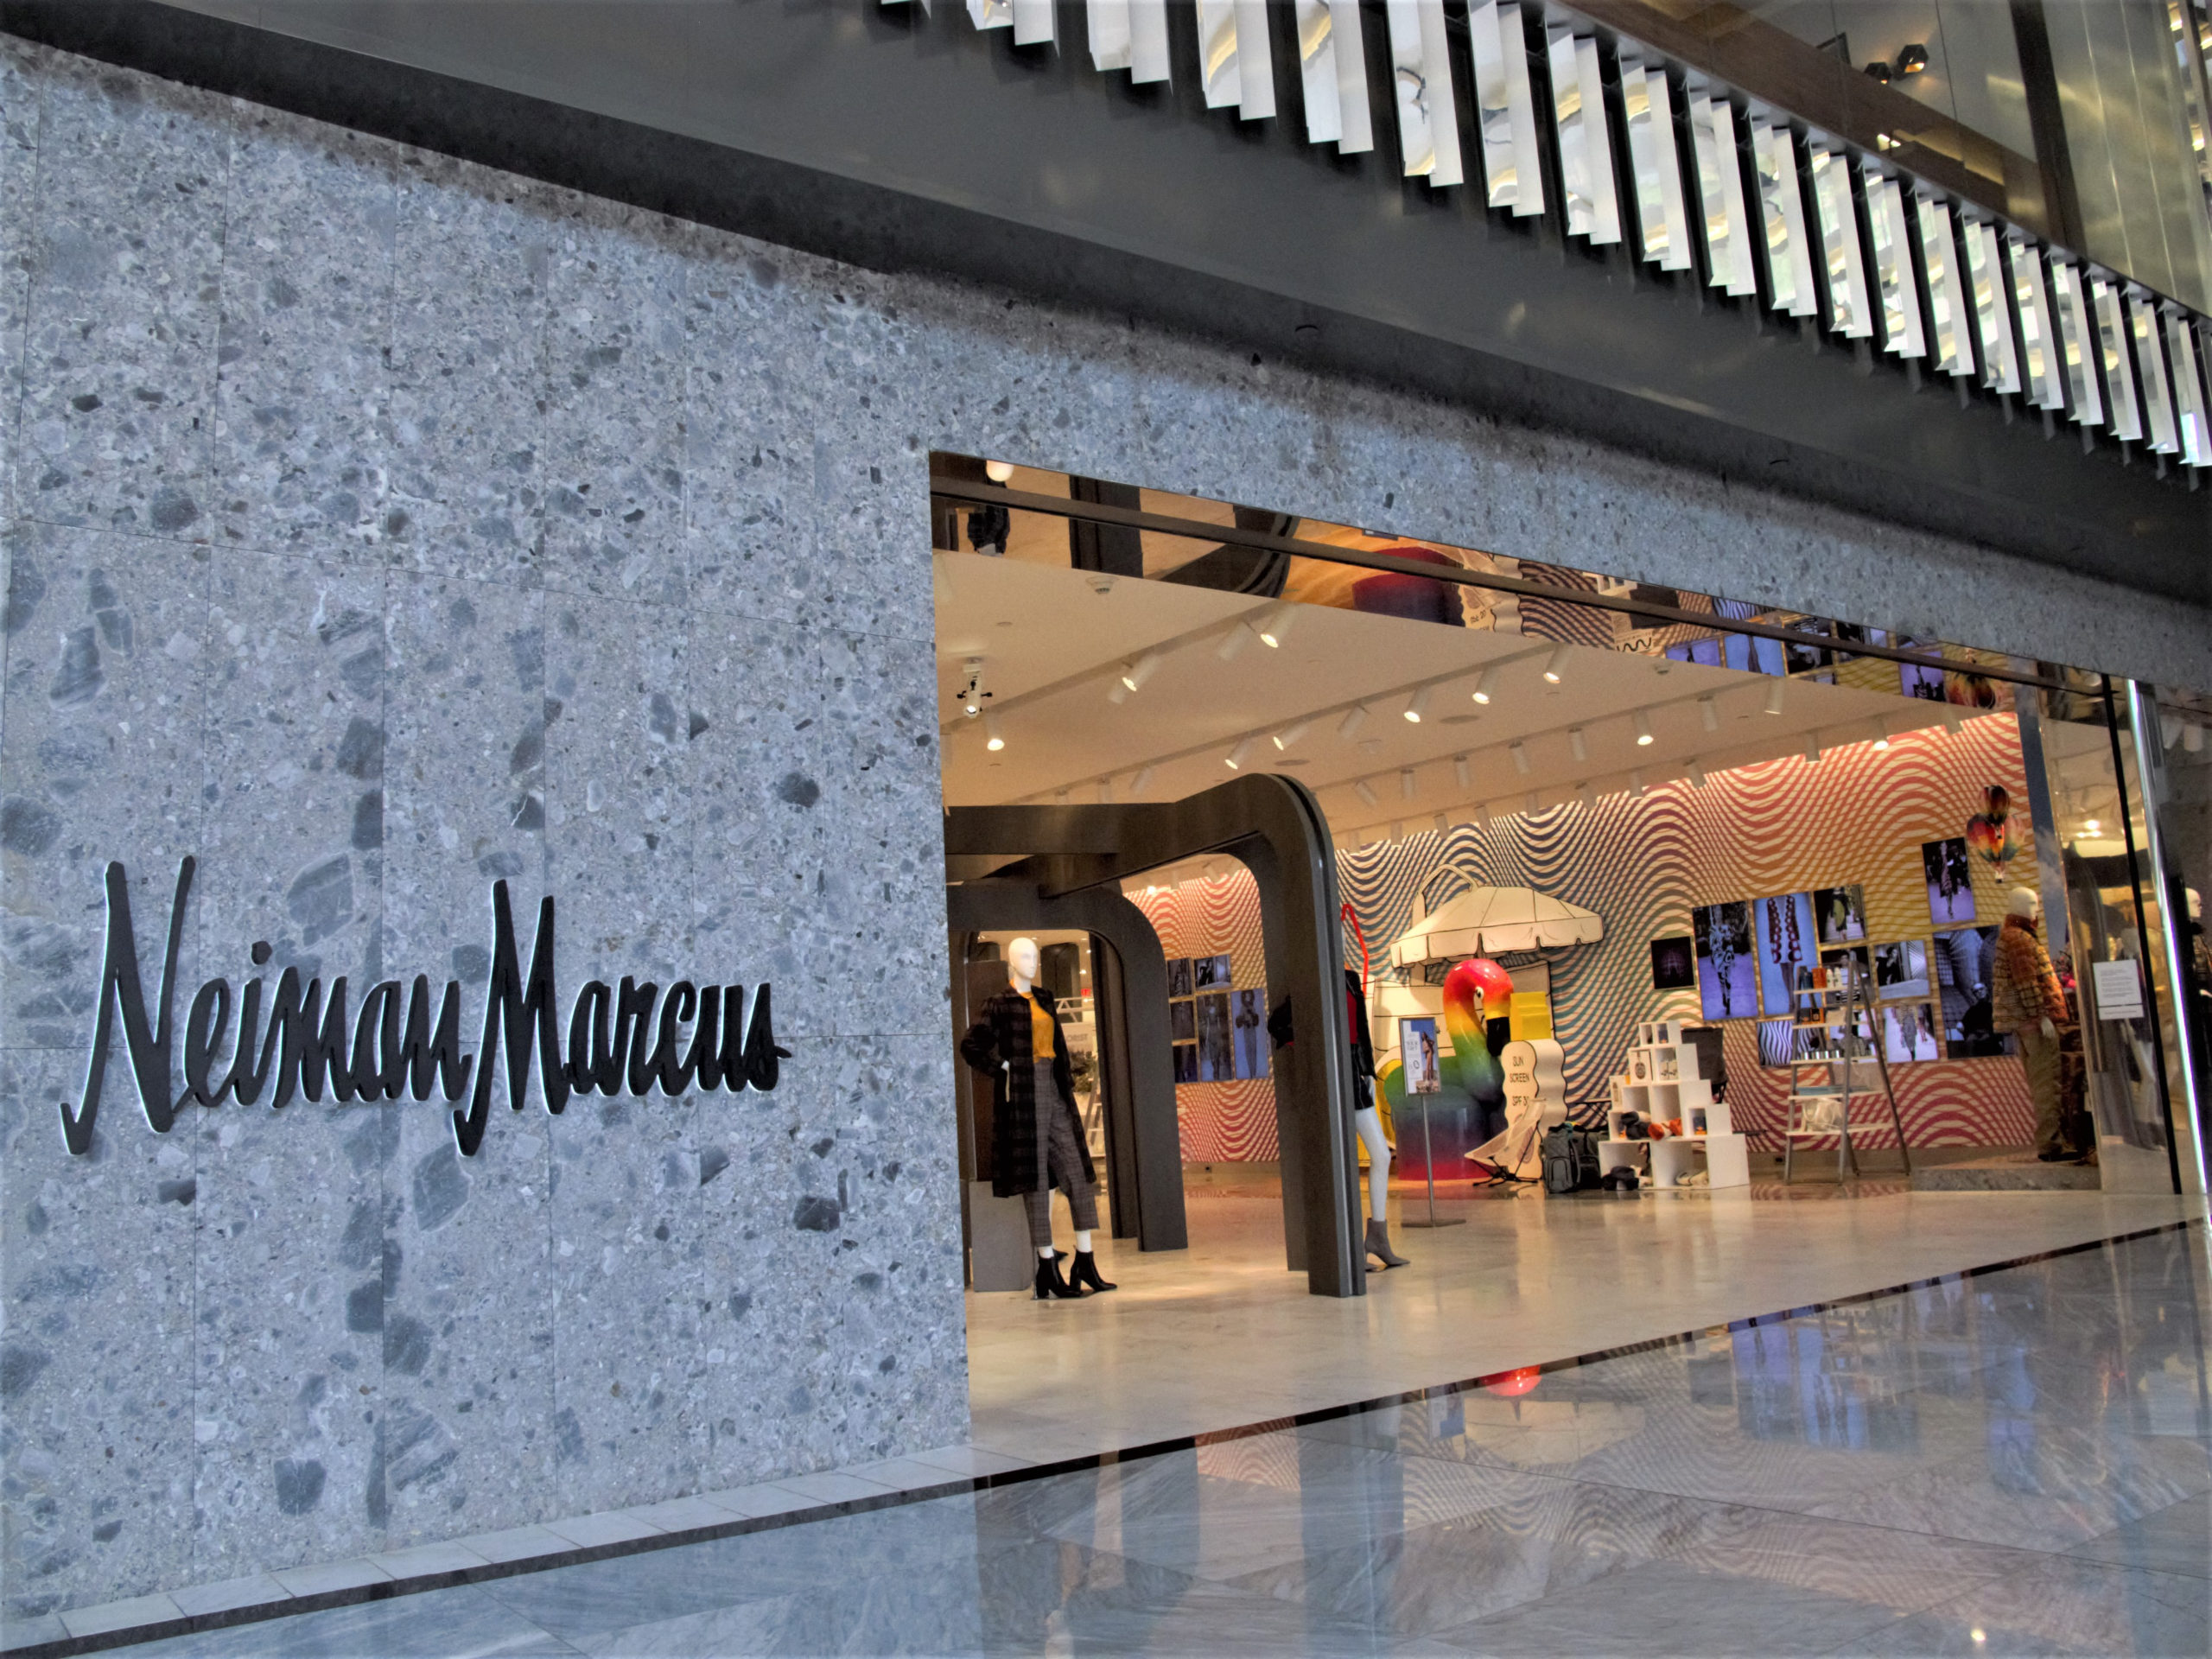 Dallas Based Company, Neiman Marcus, Laying Off Approximately 500 Employees  : r/Dallas